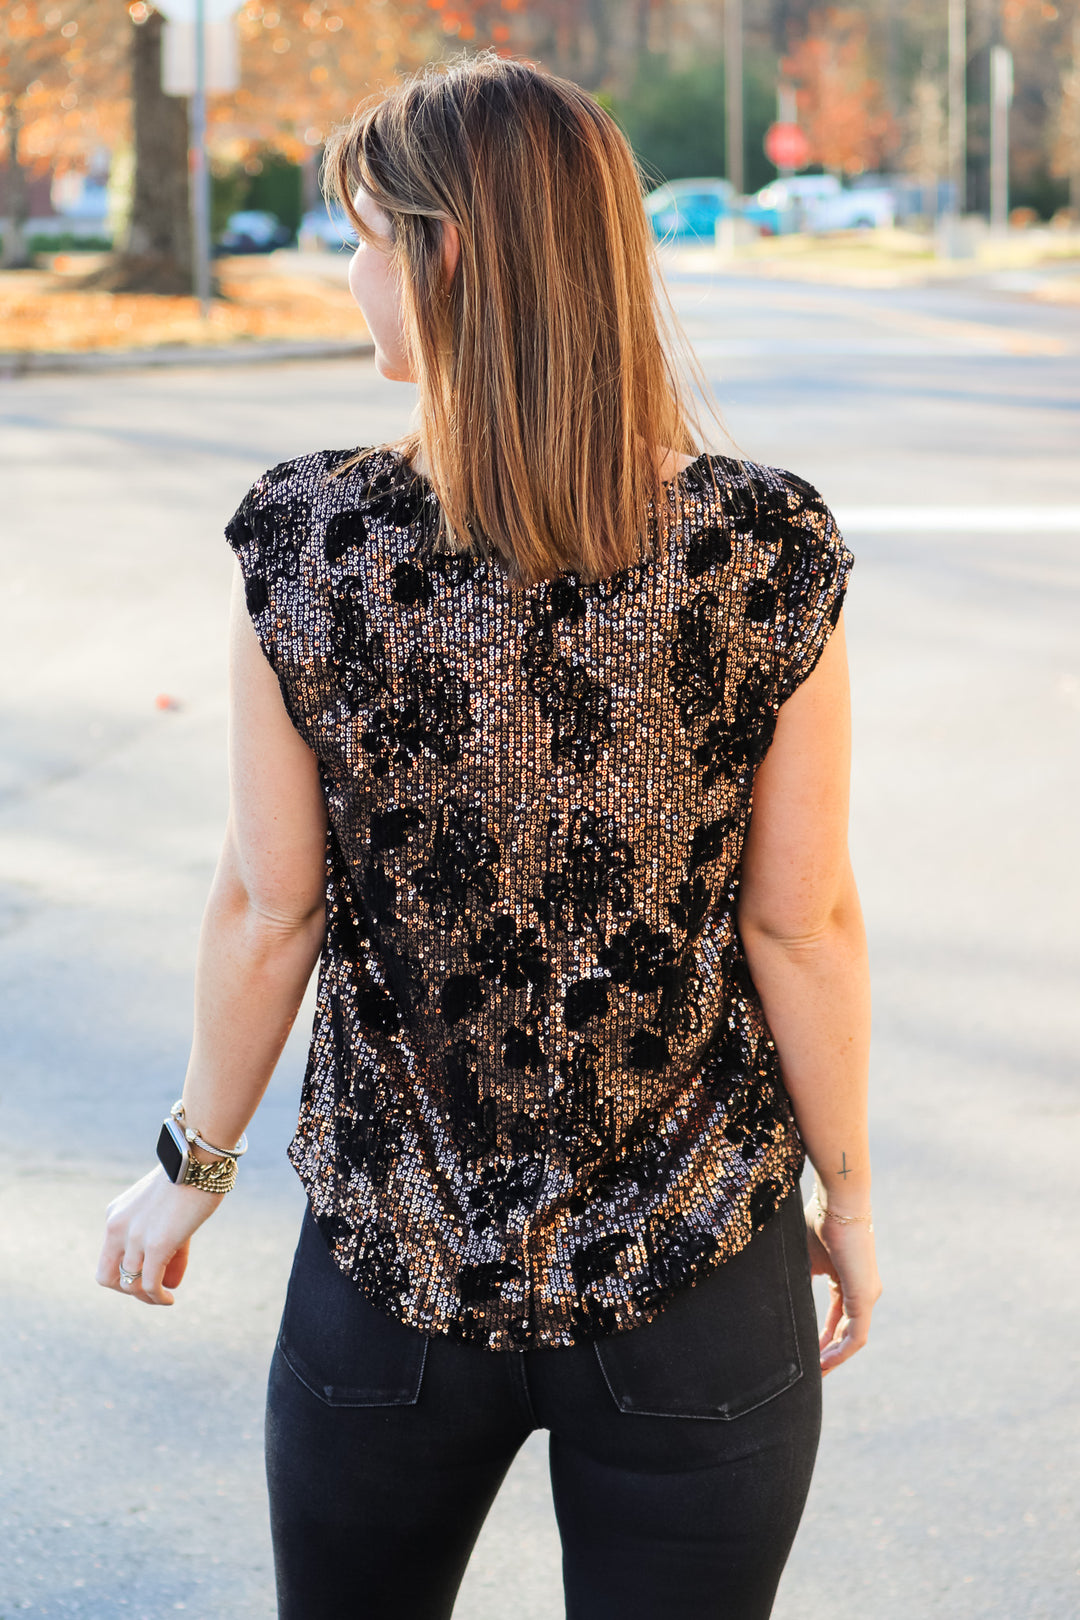 A brunette woman standing outside wearing a cap sleeve rose gold and black sequin top with a v neck and black jeans. She is rear facing.